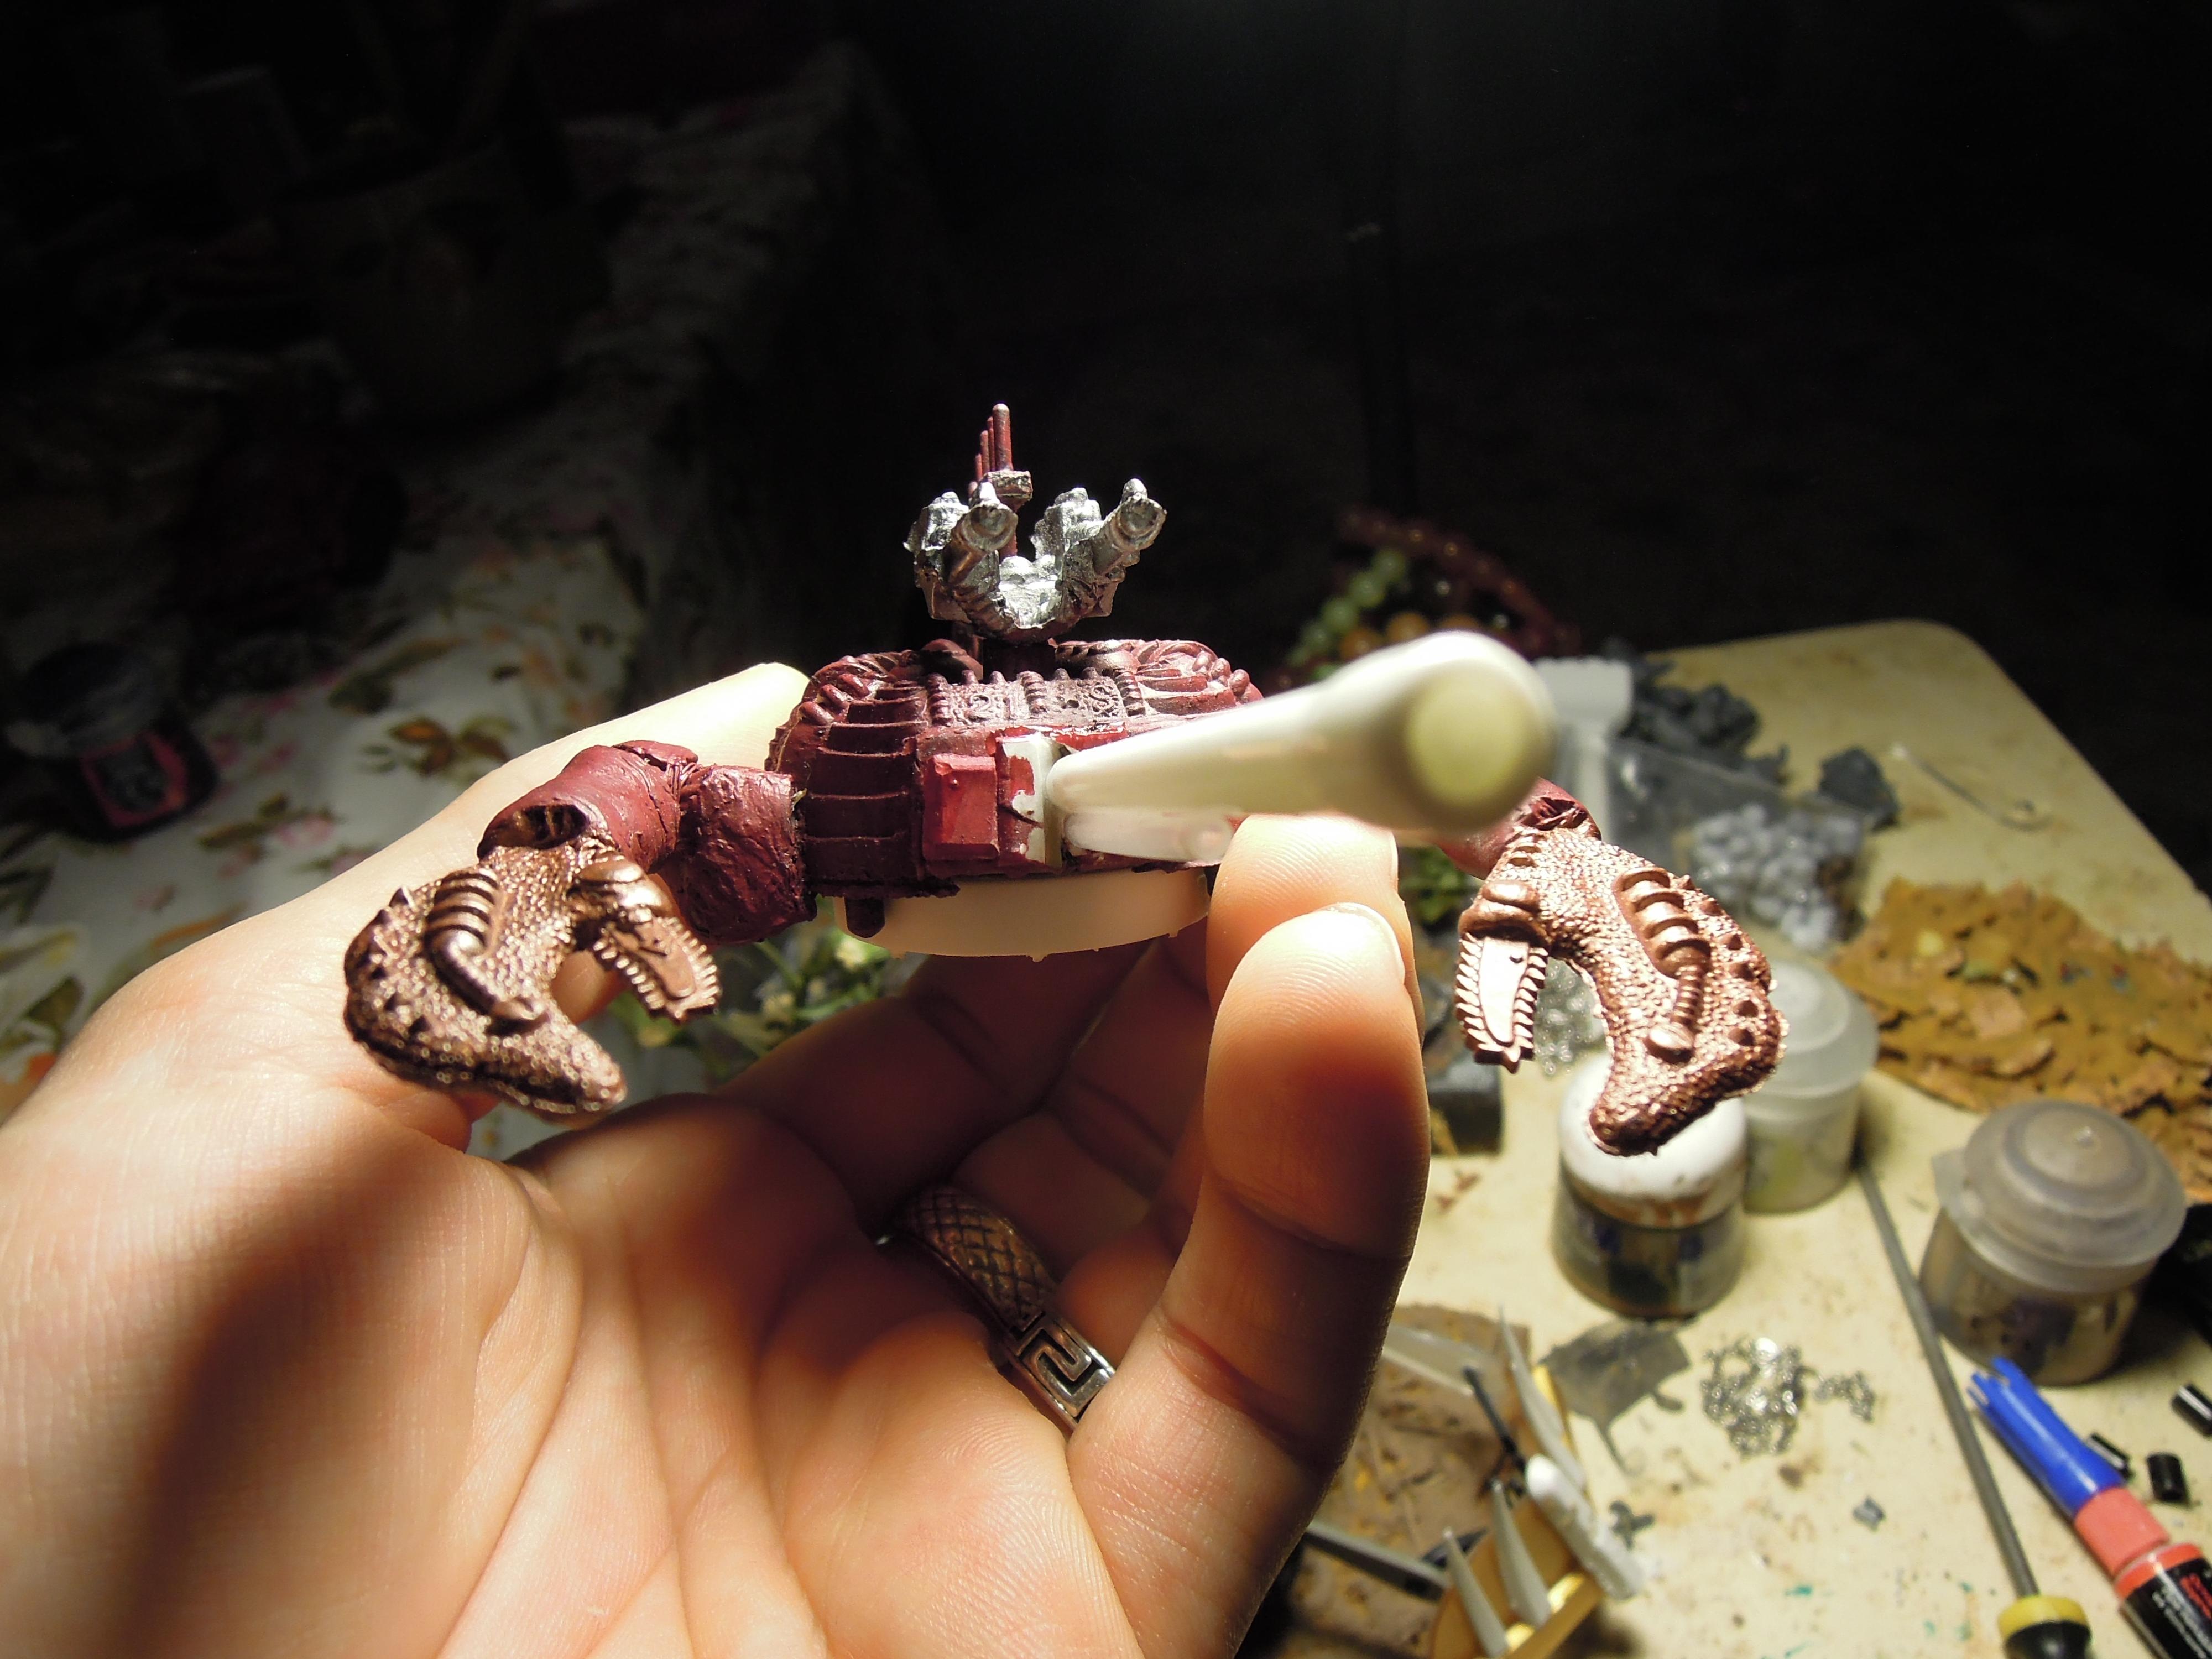 Armored Vehicle, Blood Pact, Chaos, Claws, Conversion, Daemon Engine, Heavy Support, Heresy, Scorpion, Scratch Build, Tank, Technolog, Tehnolog, Warhammer 40,000, Work In Progress